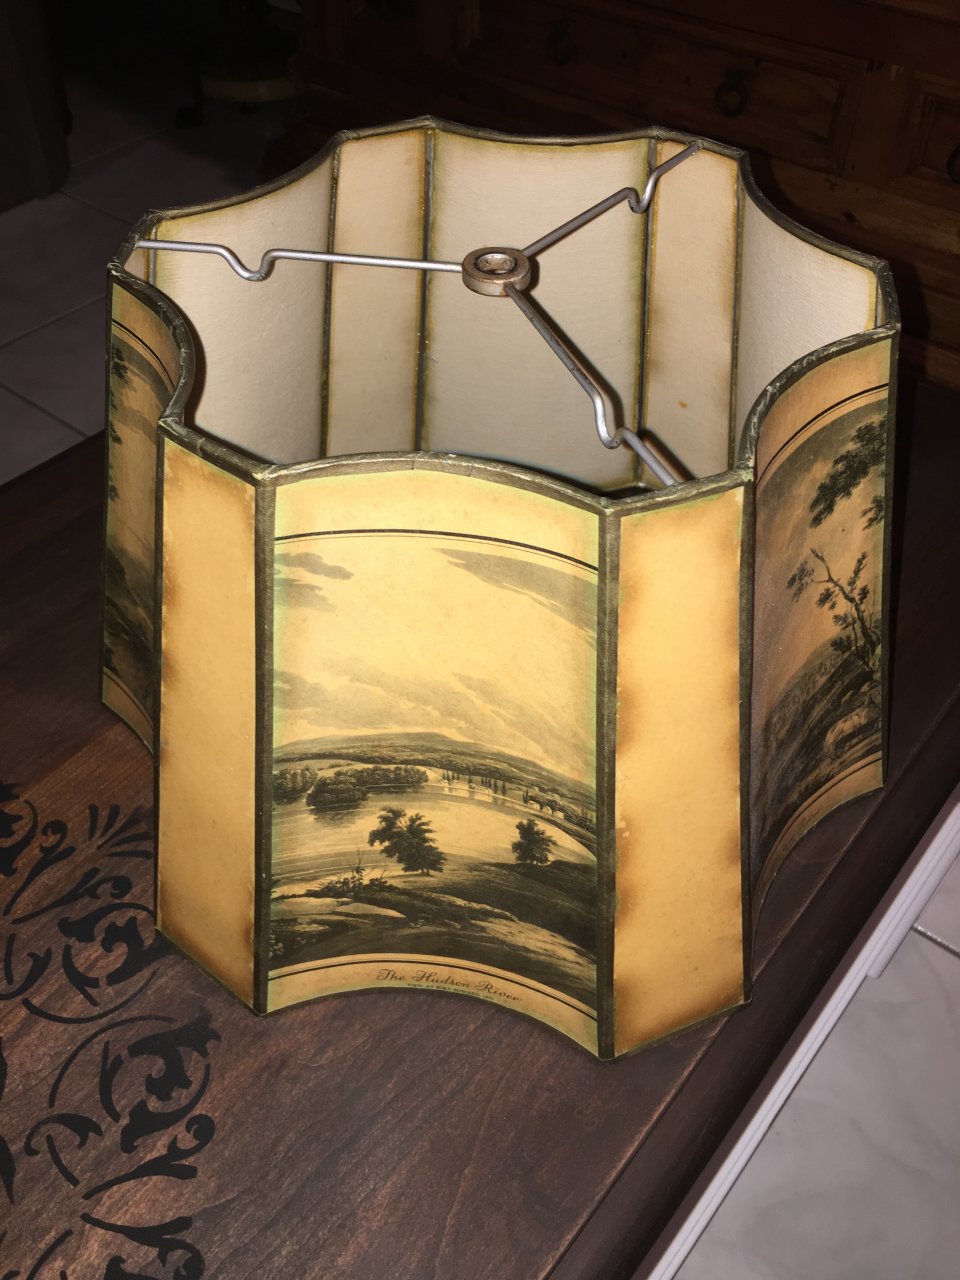 I Found A Old Paper Lamp Shade With Multiple Scenes Of New York, Anyone